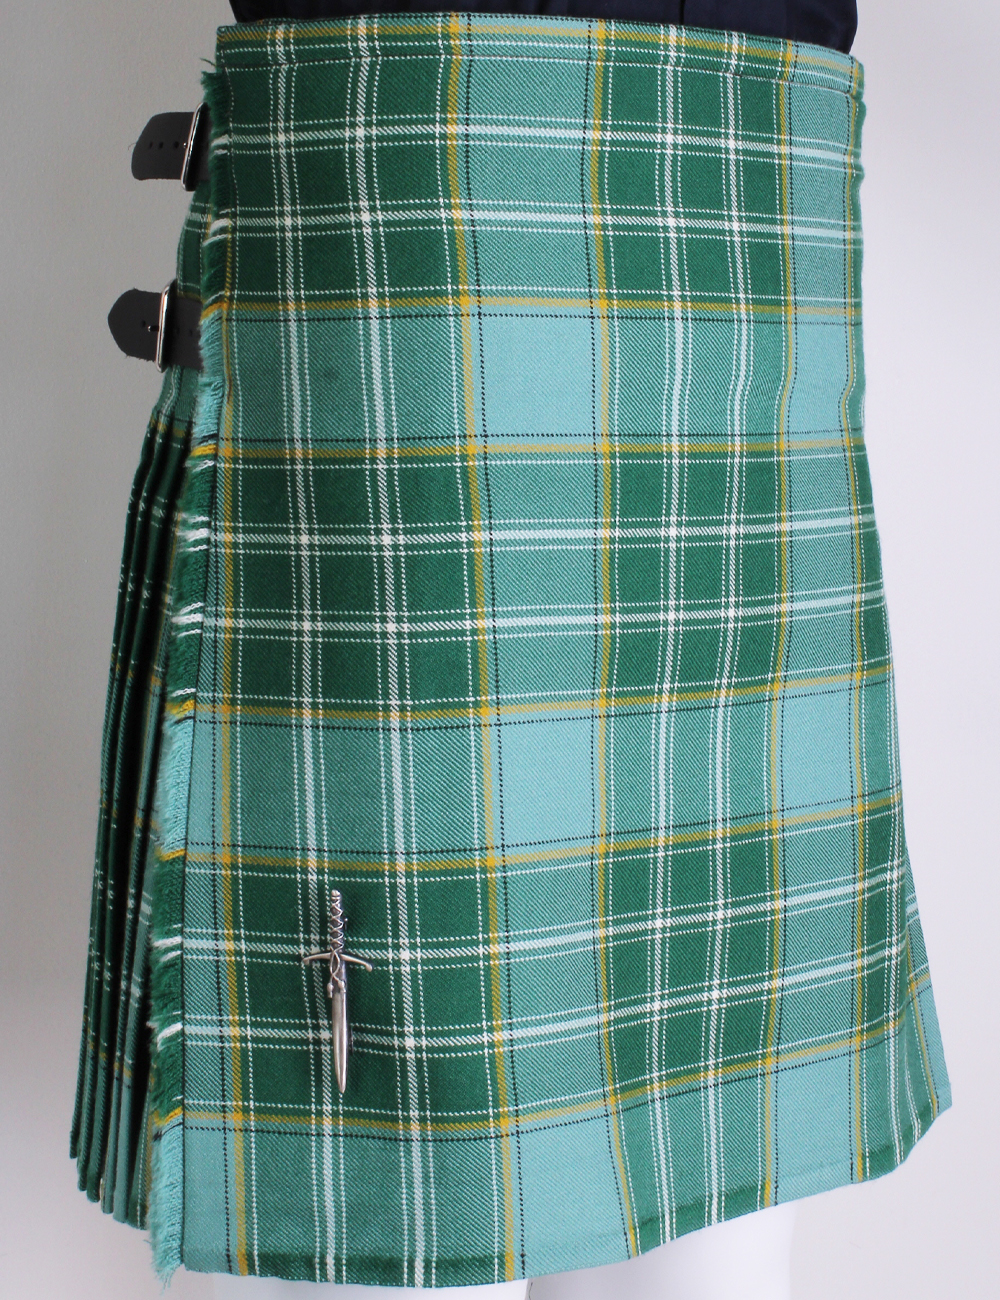 Hand Stitched Kilt - Front View (Kilt pin not included)